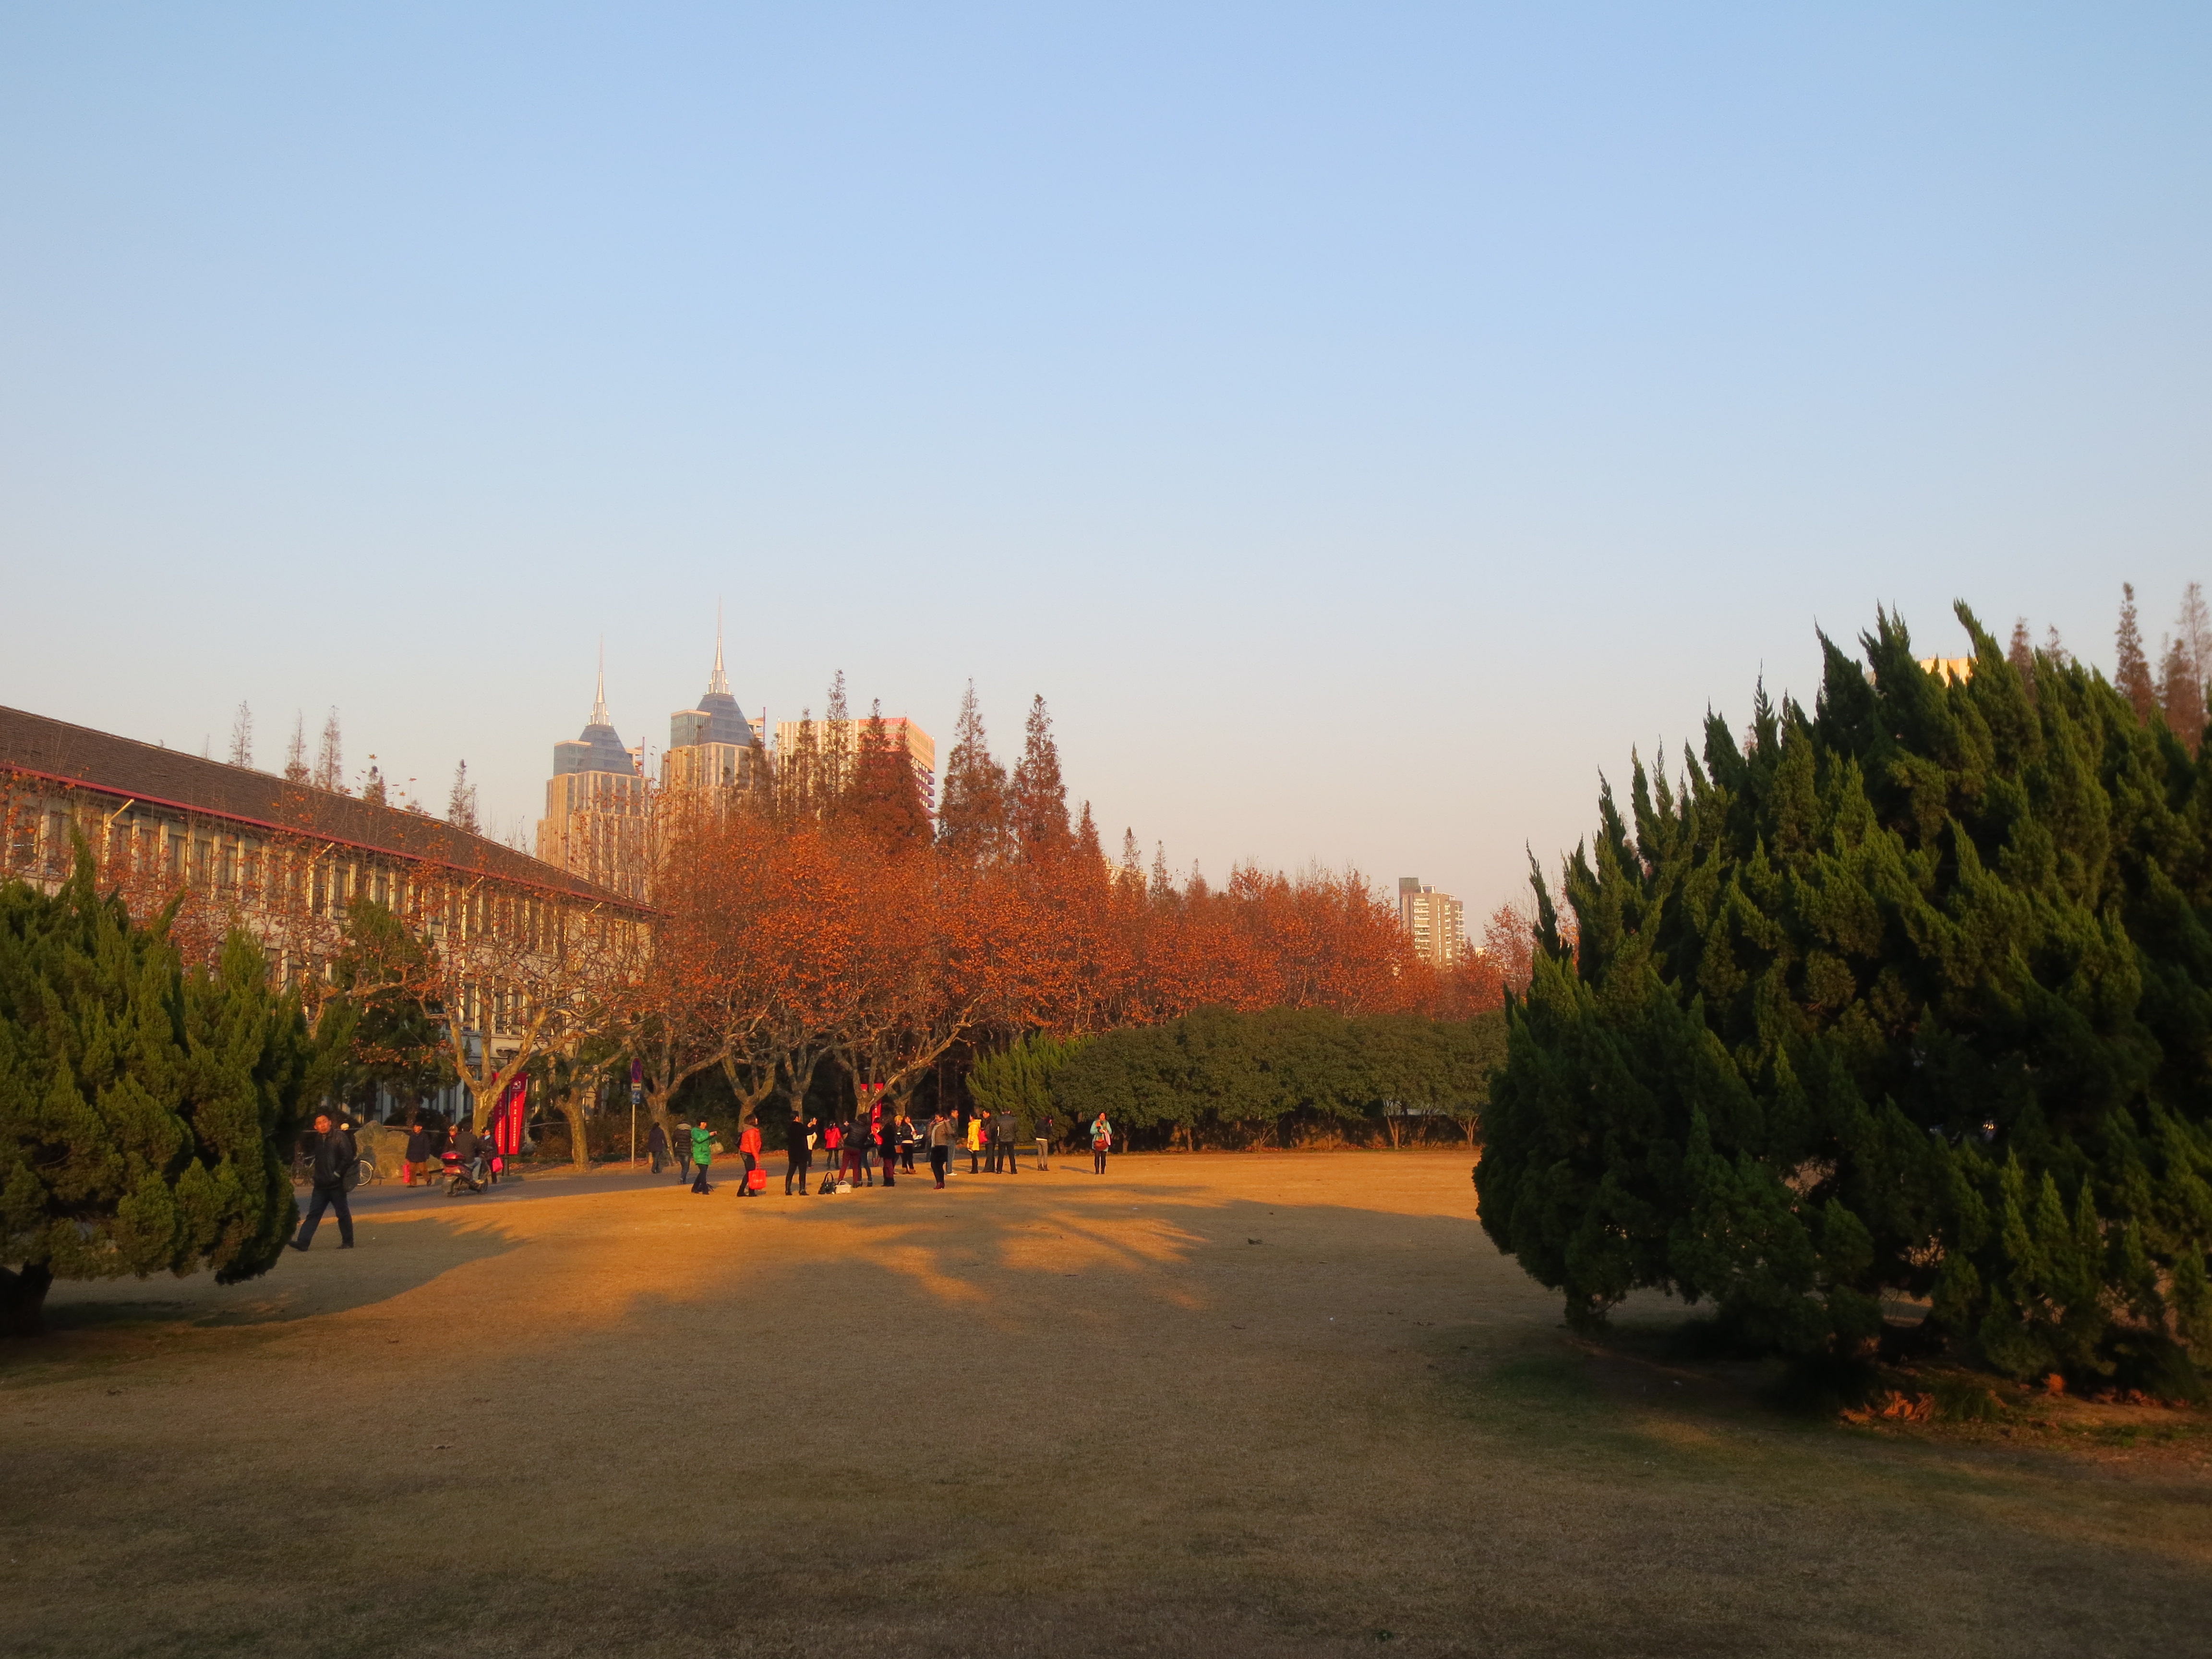 ECNU's incredible campus in downtown Shanhai - complete with a grassy quad